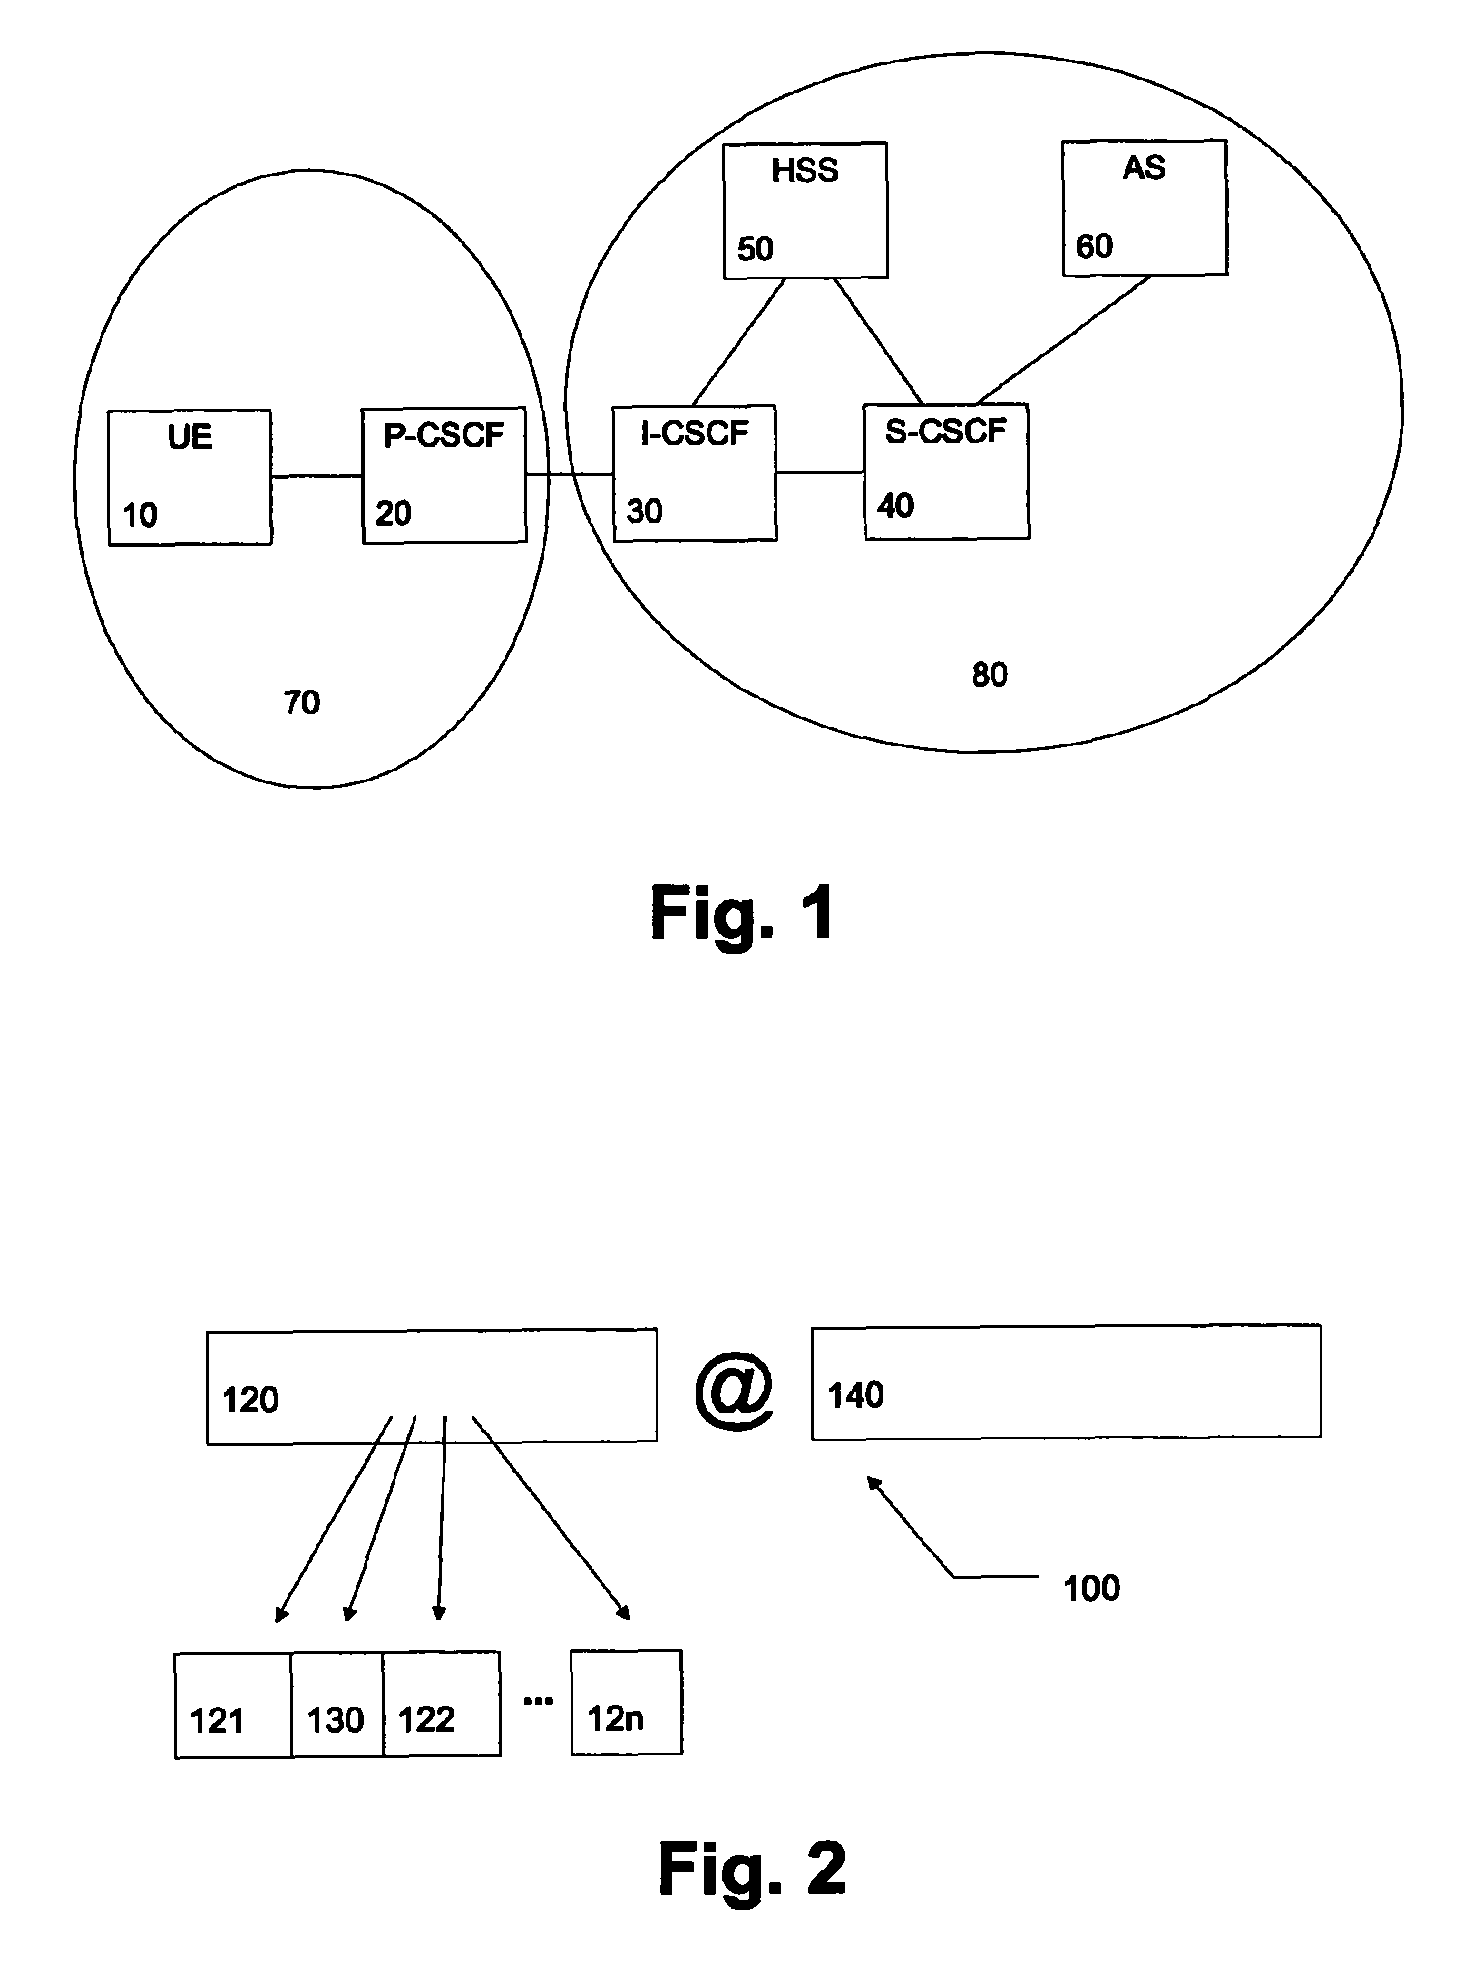 Message-based conveyance of load control information